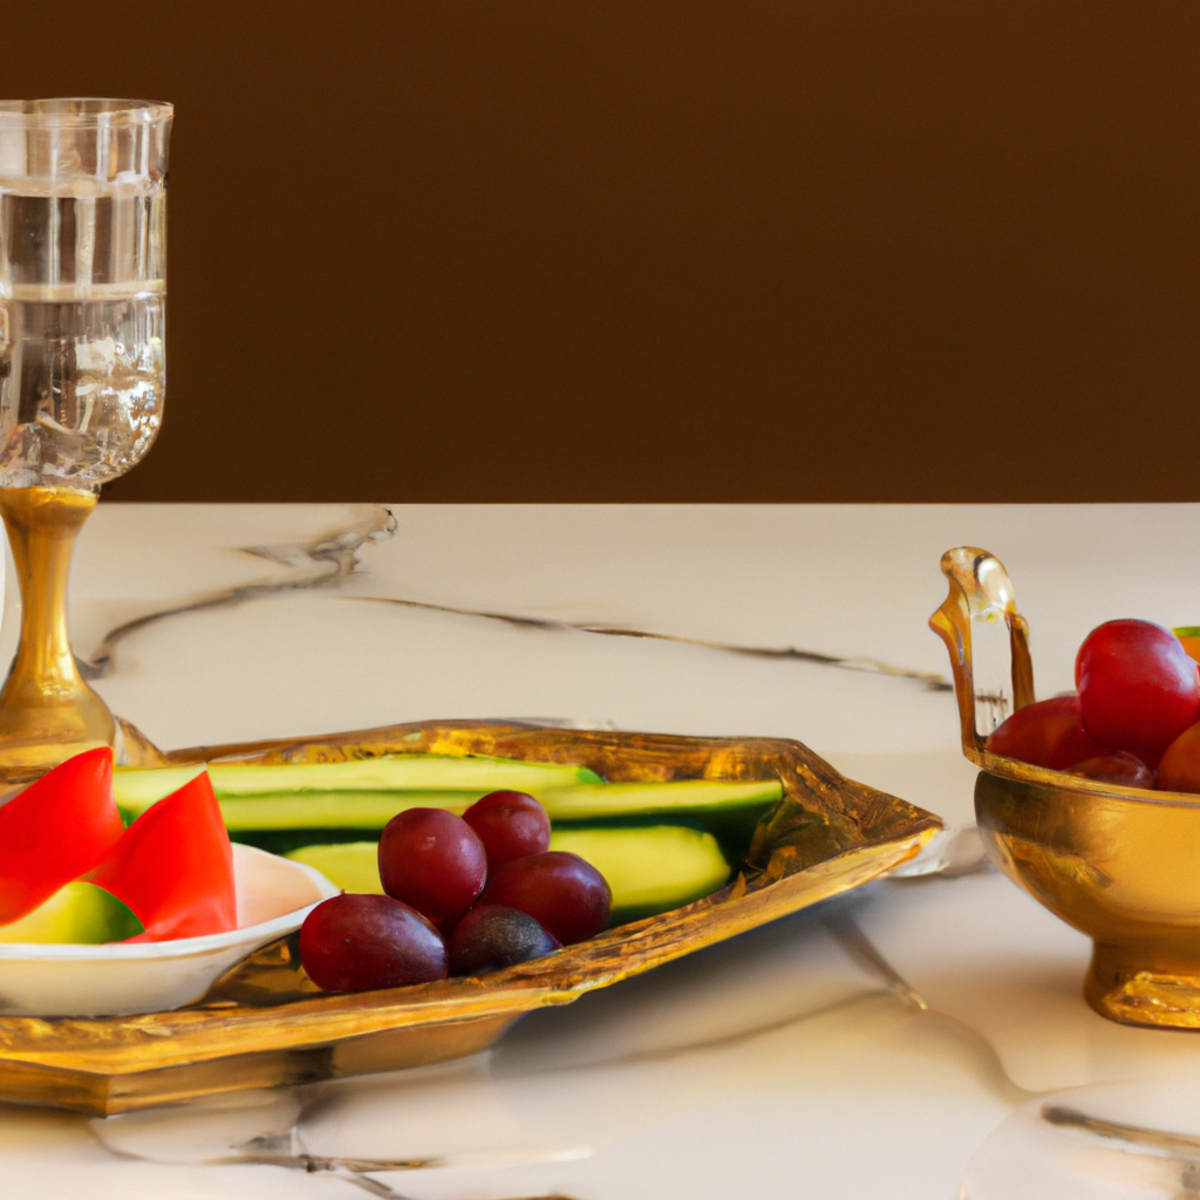 Colorful and nutritious plate of food on an elegant table, emphasizing the importance of nutrition for gastroparesis.